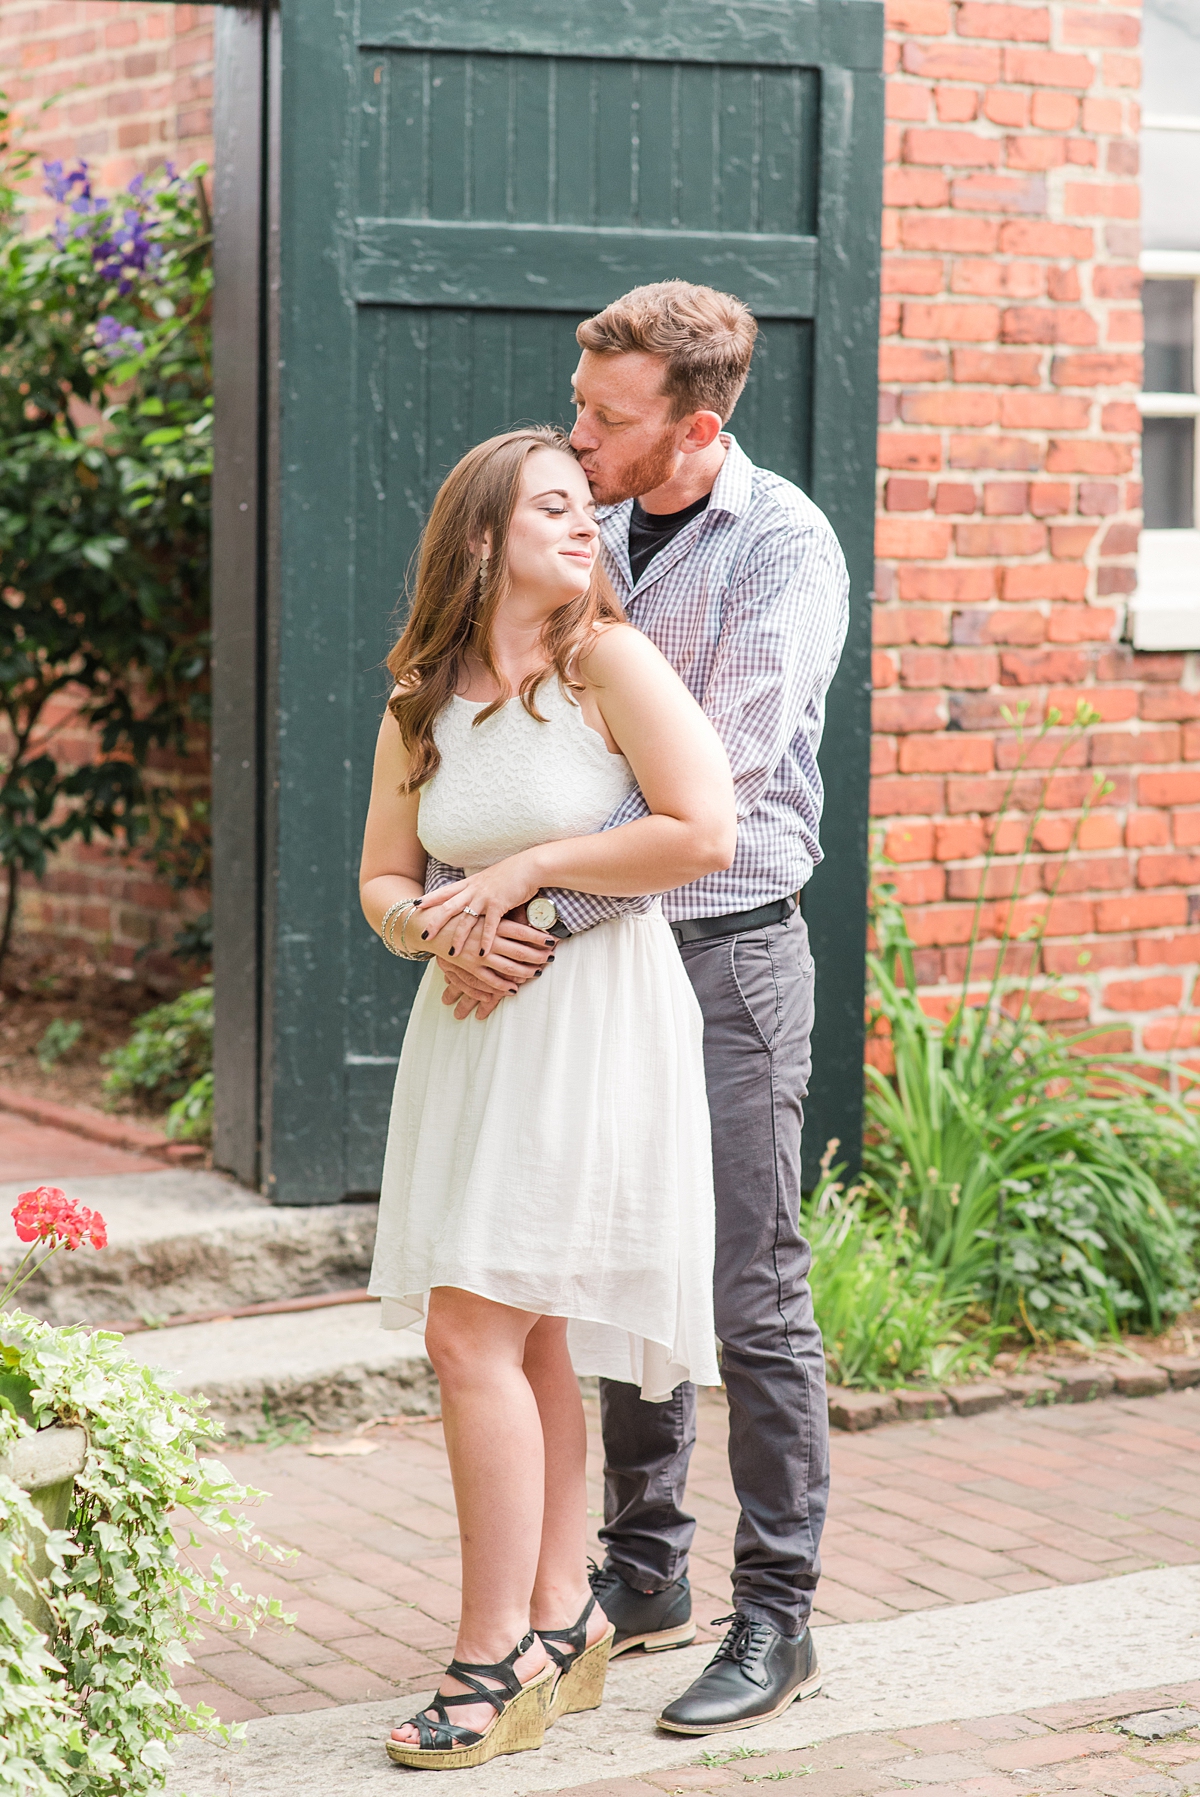 Edgar Allen Poe Museum Engagement Session in Downtown Richmond. Photography by Richmond Wedding Photographer Kailey Brianne Photography. 